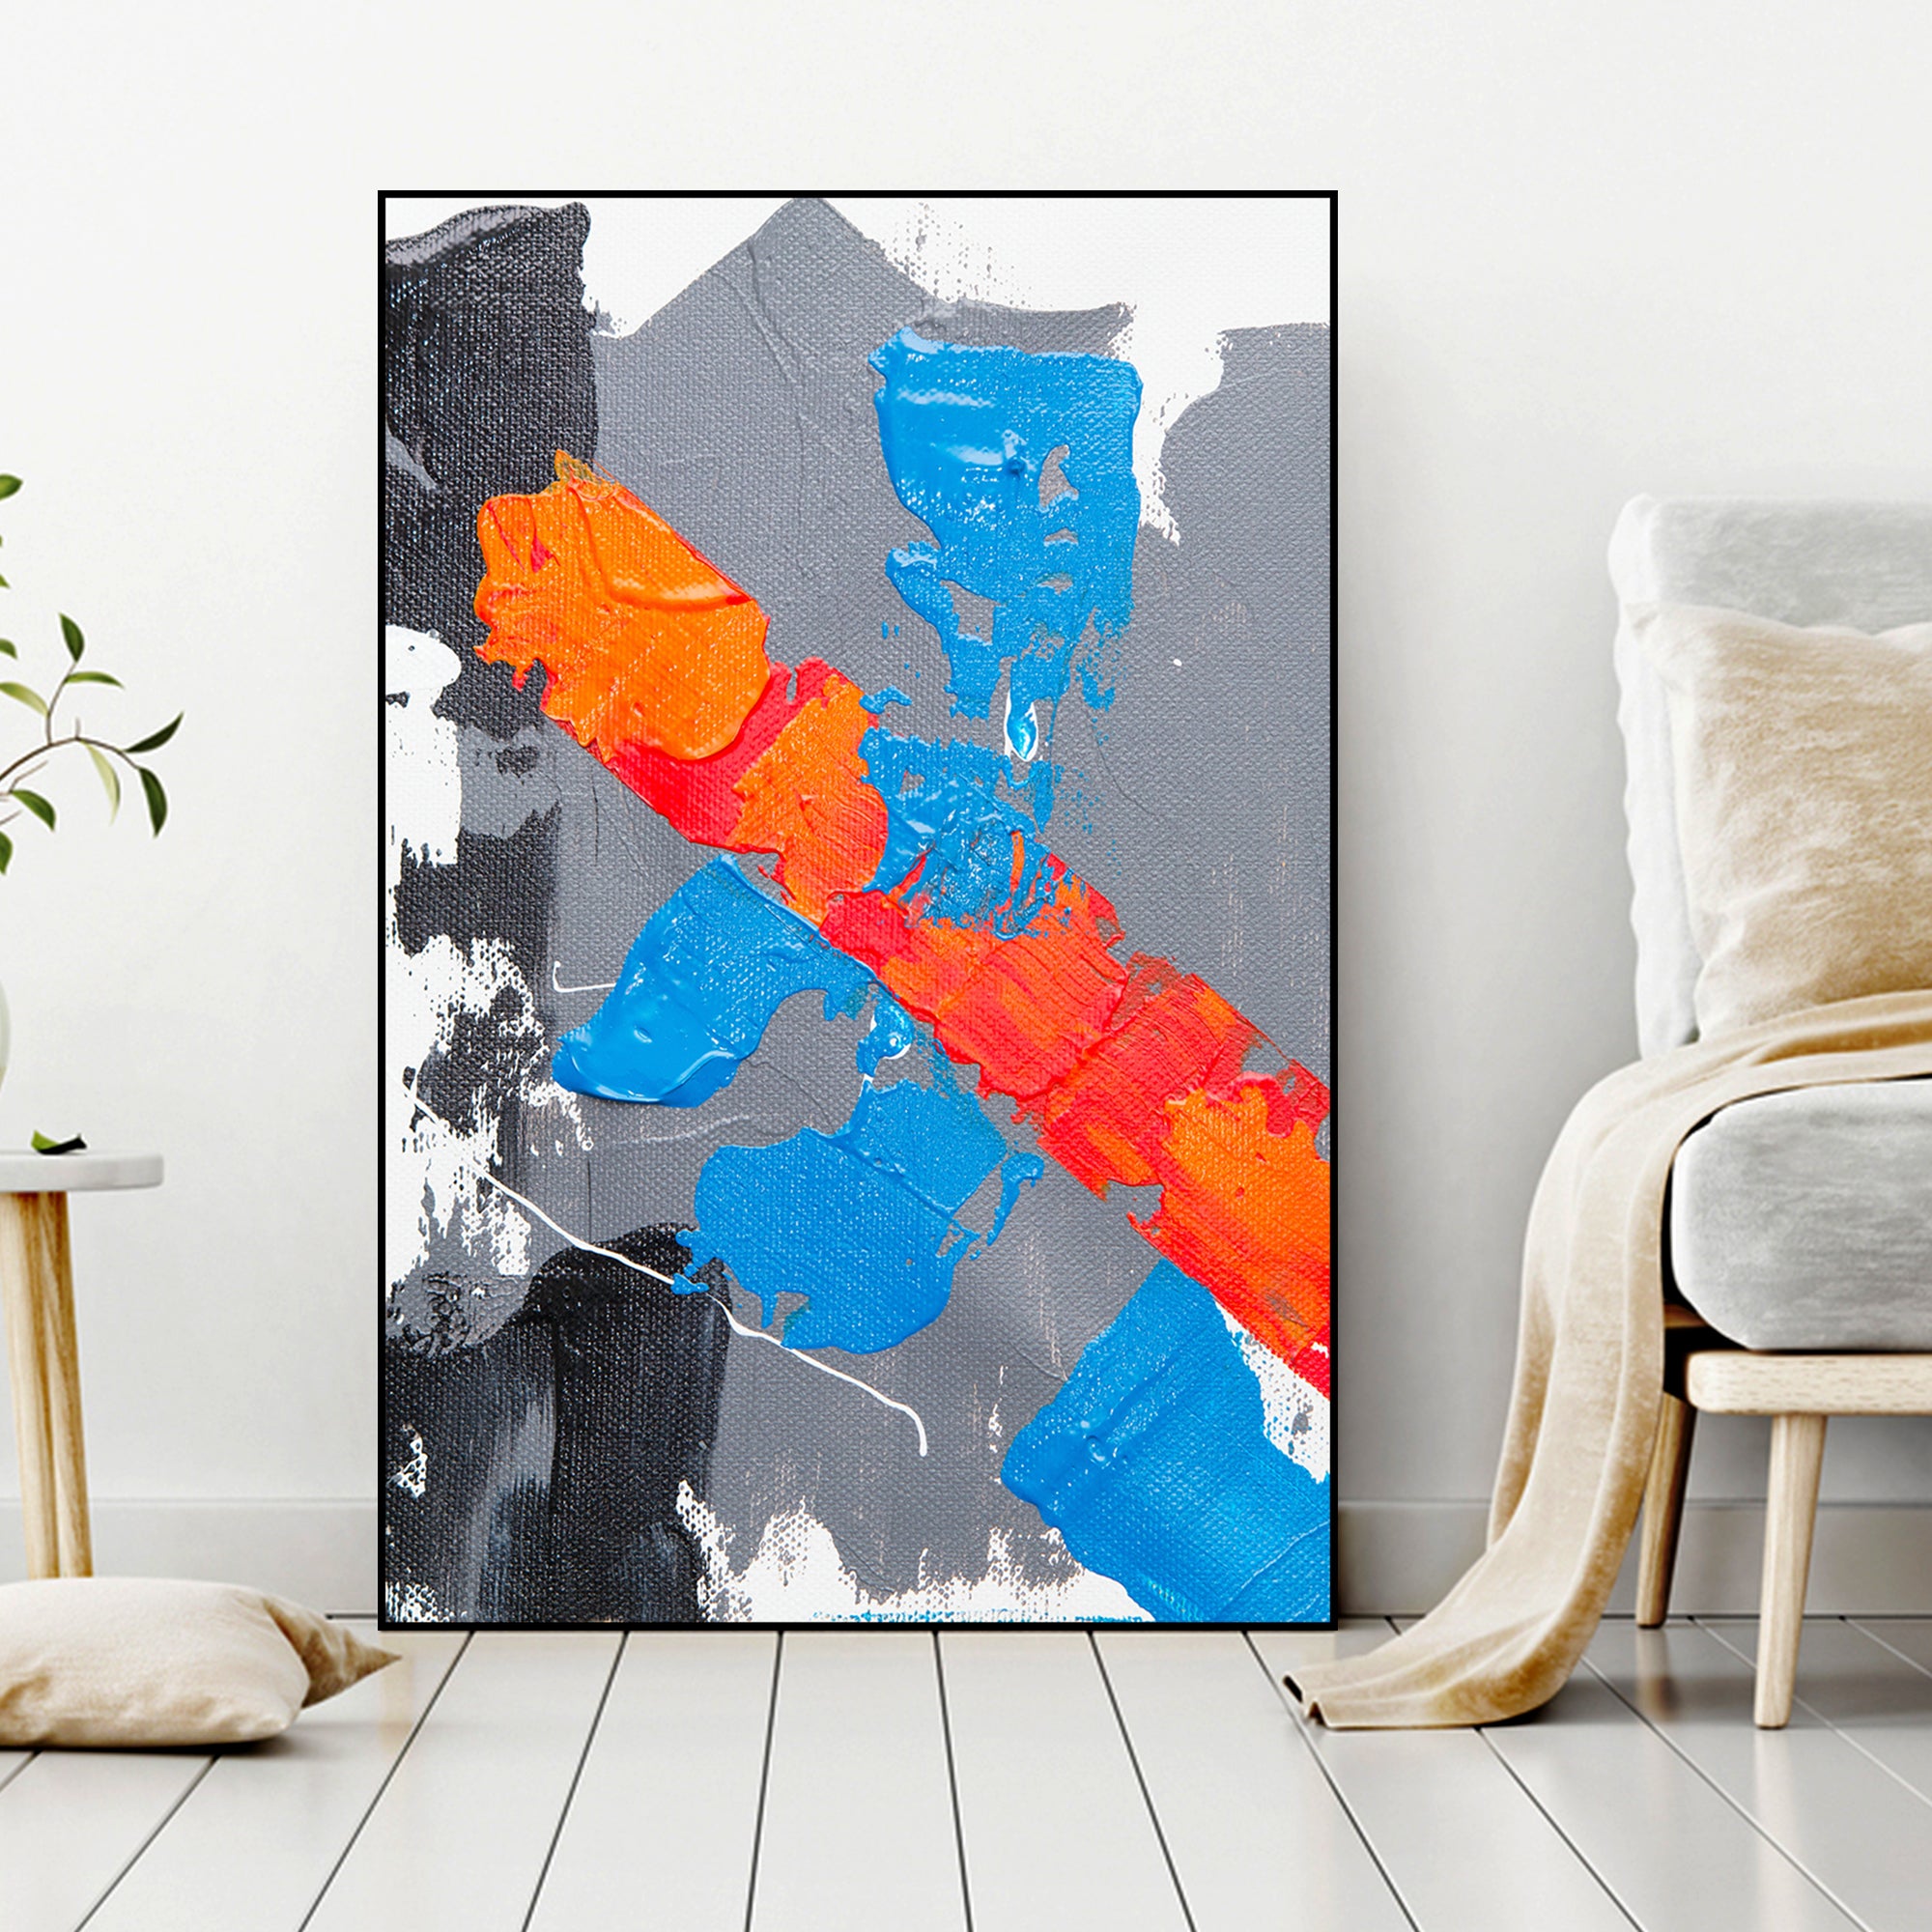 Modern Abstract Art Floating Canvas Wall Painting